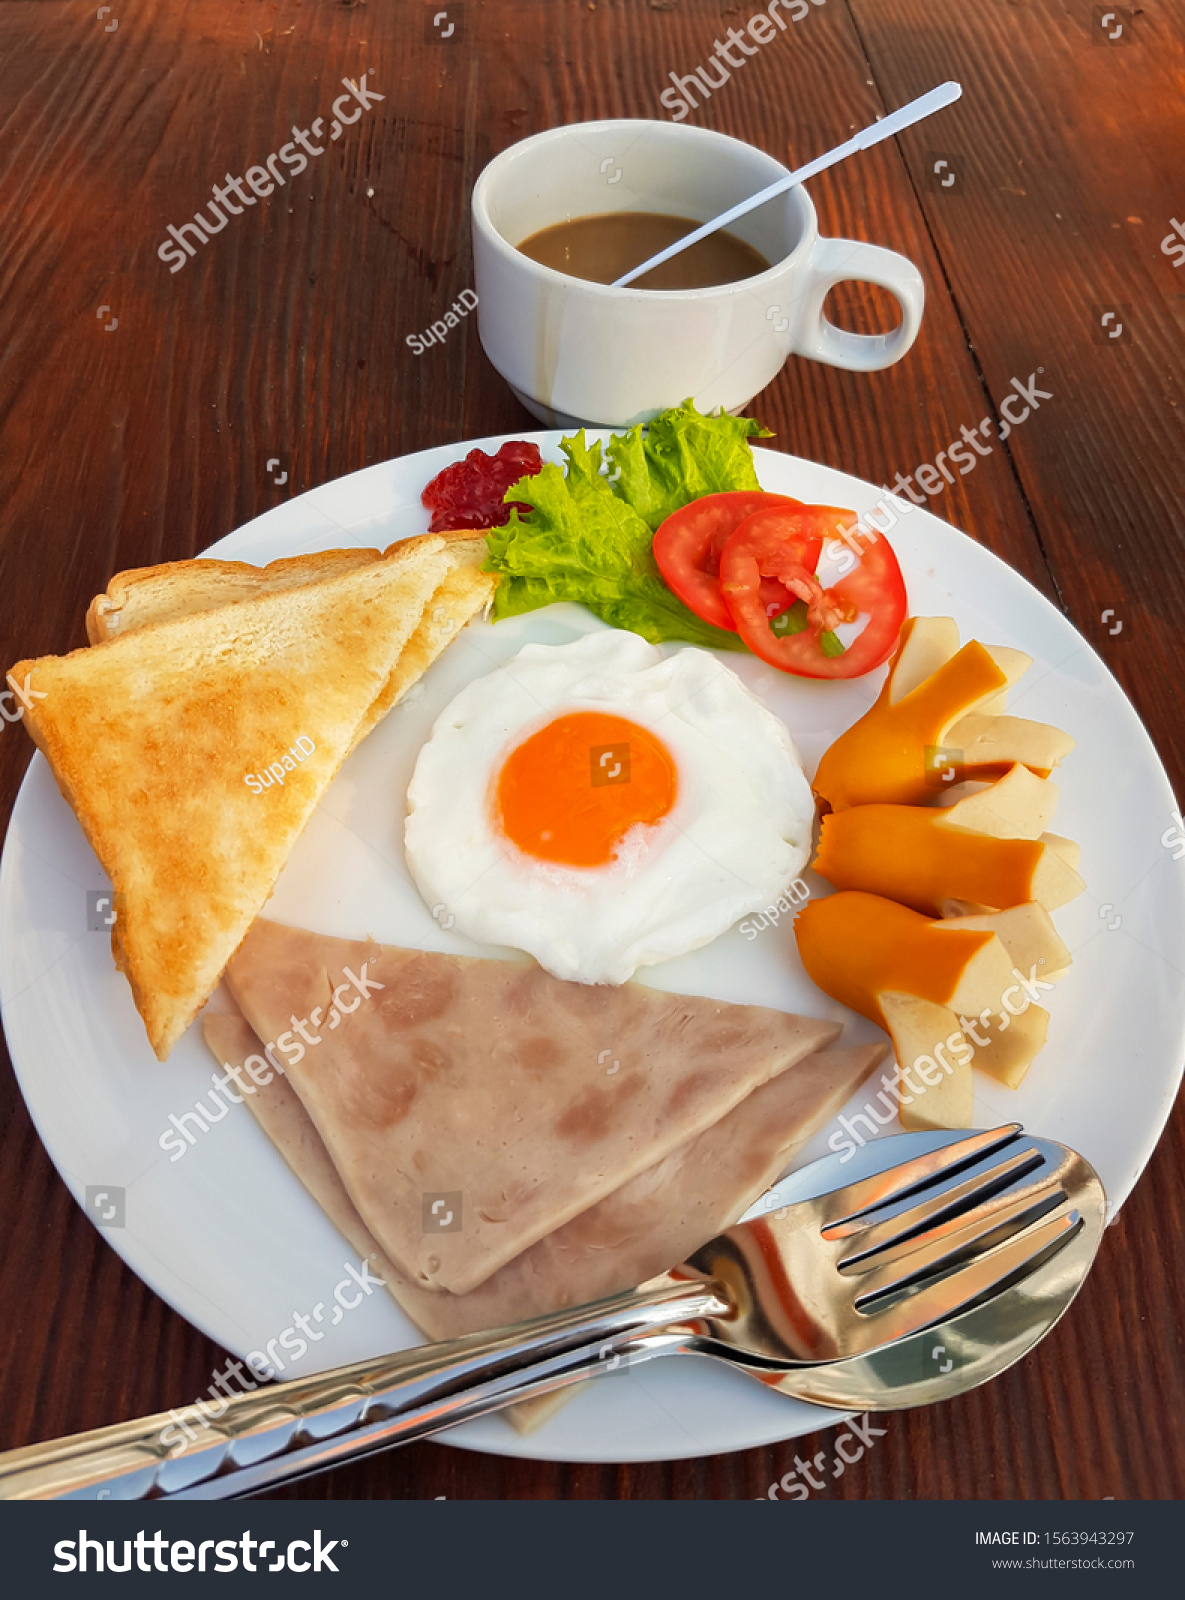 American breakfast includes fried egg, filling, ham, toast, lettuce and tomato, sliced on a white plate and coffee on a wooden table. #1563943297